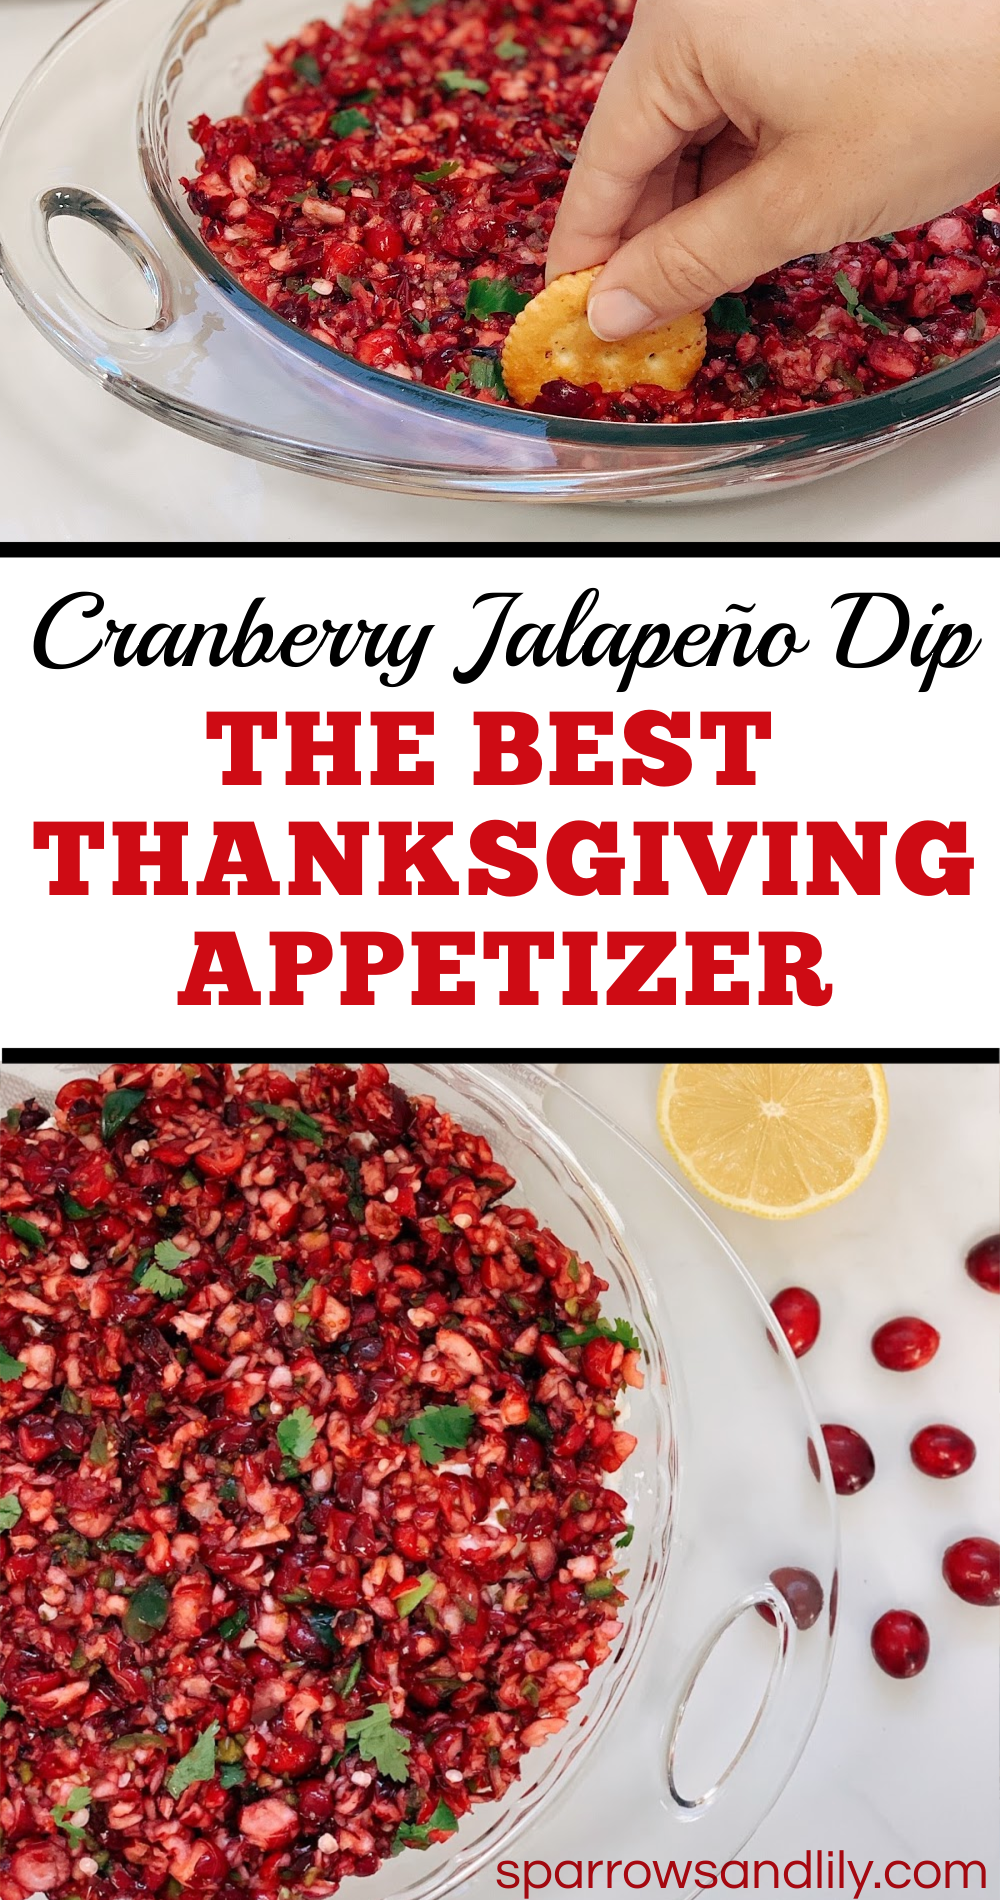 The Most Addictive Thanksgiving Appetizer -   19 thanksgiving recipes appetizers dips ideas